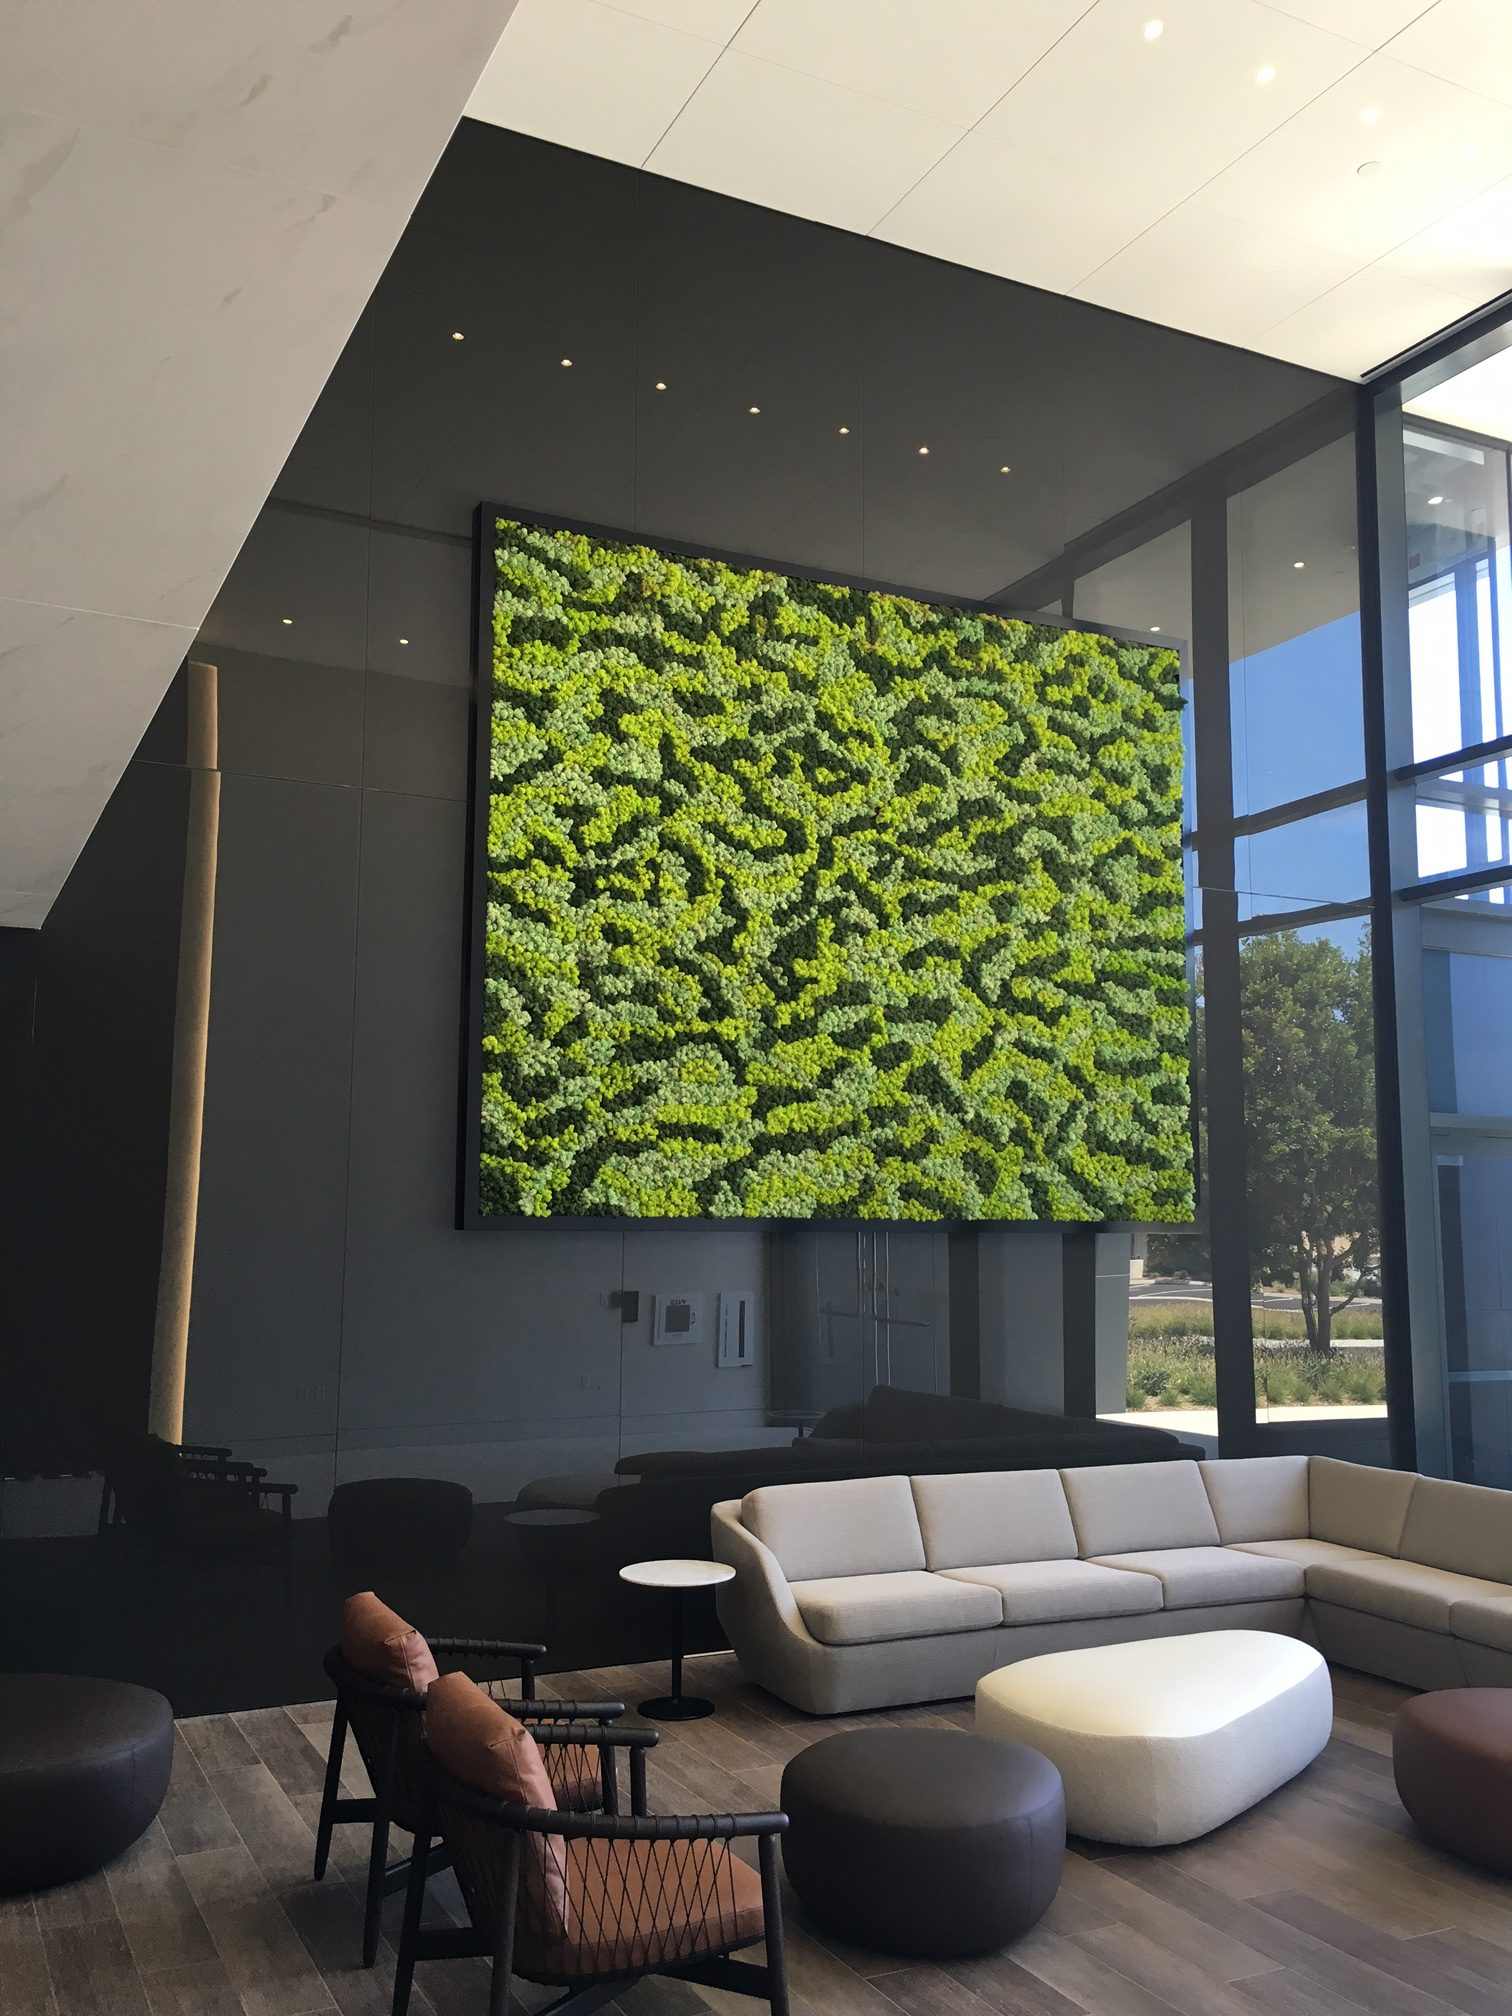 The moss wall installed by Good Earth Plant Company at San Diego's newest LEED Certified building, owned by Kilroy Realty in Del Mar Heights.